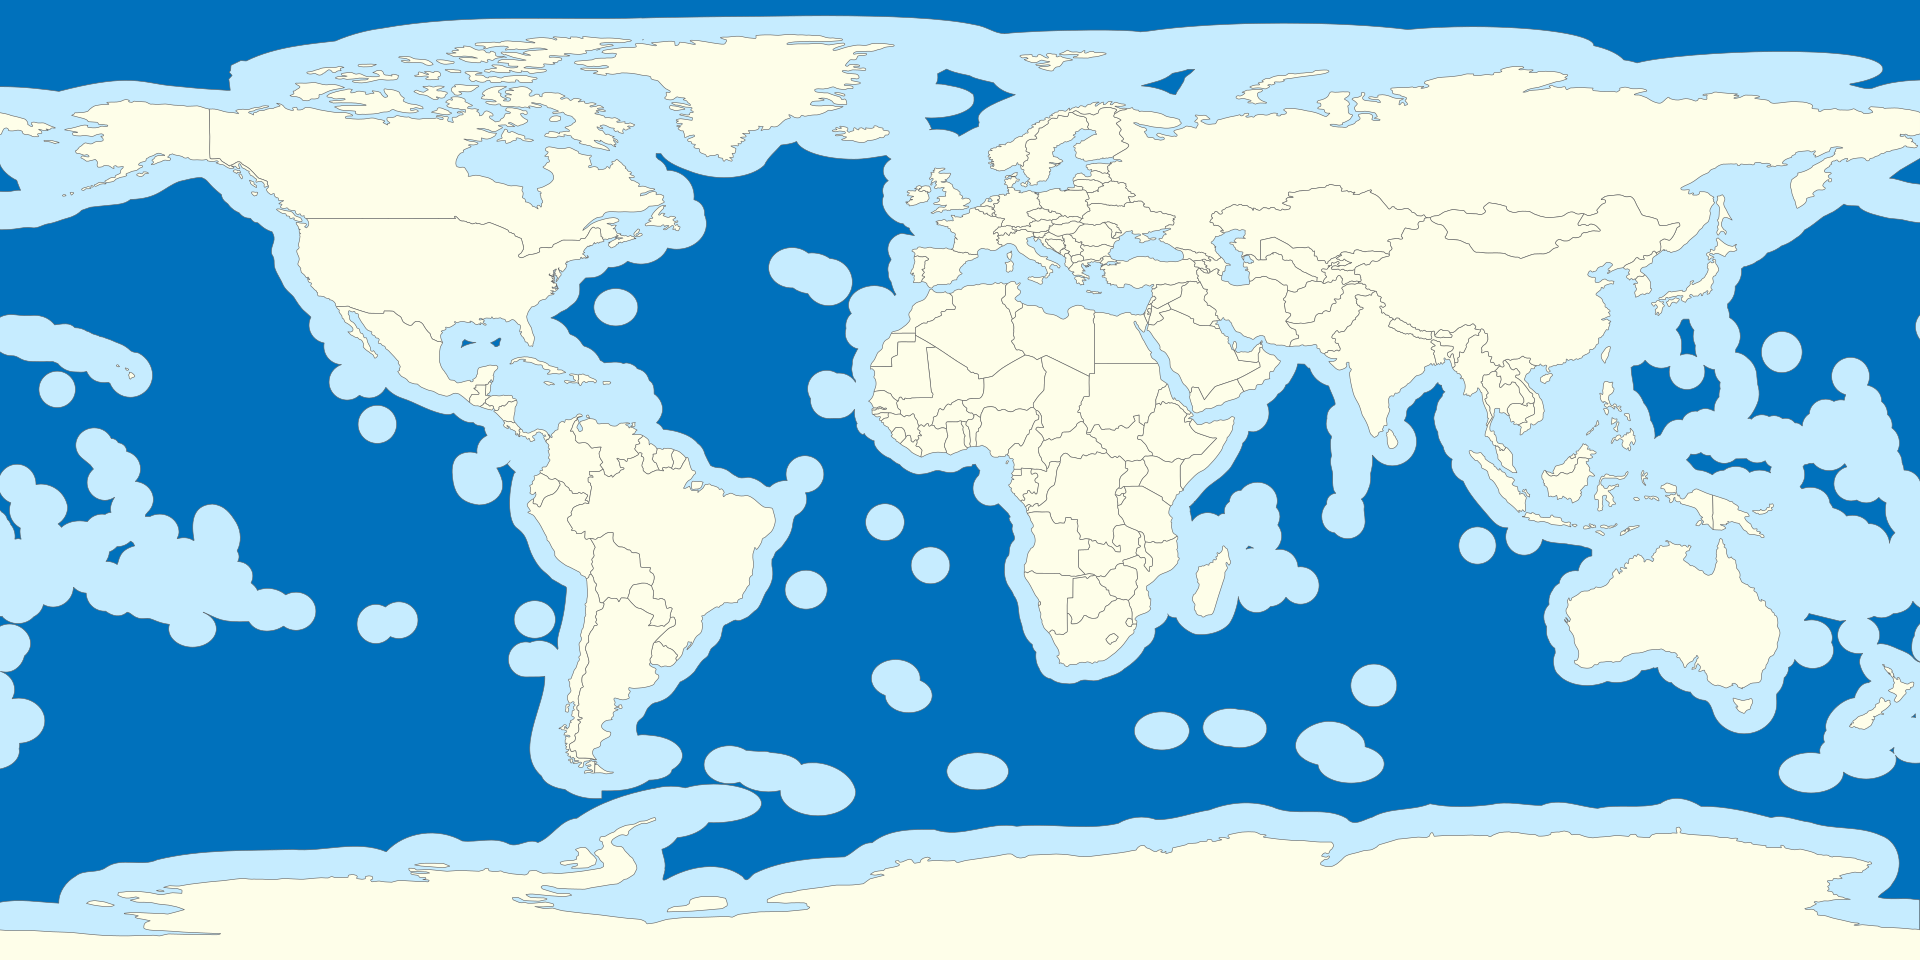 International waters are in blue